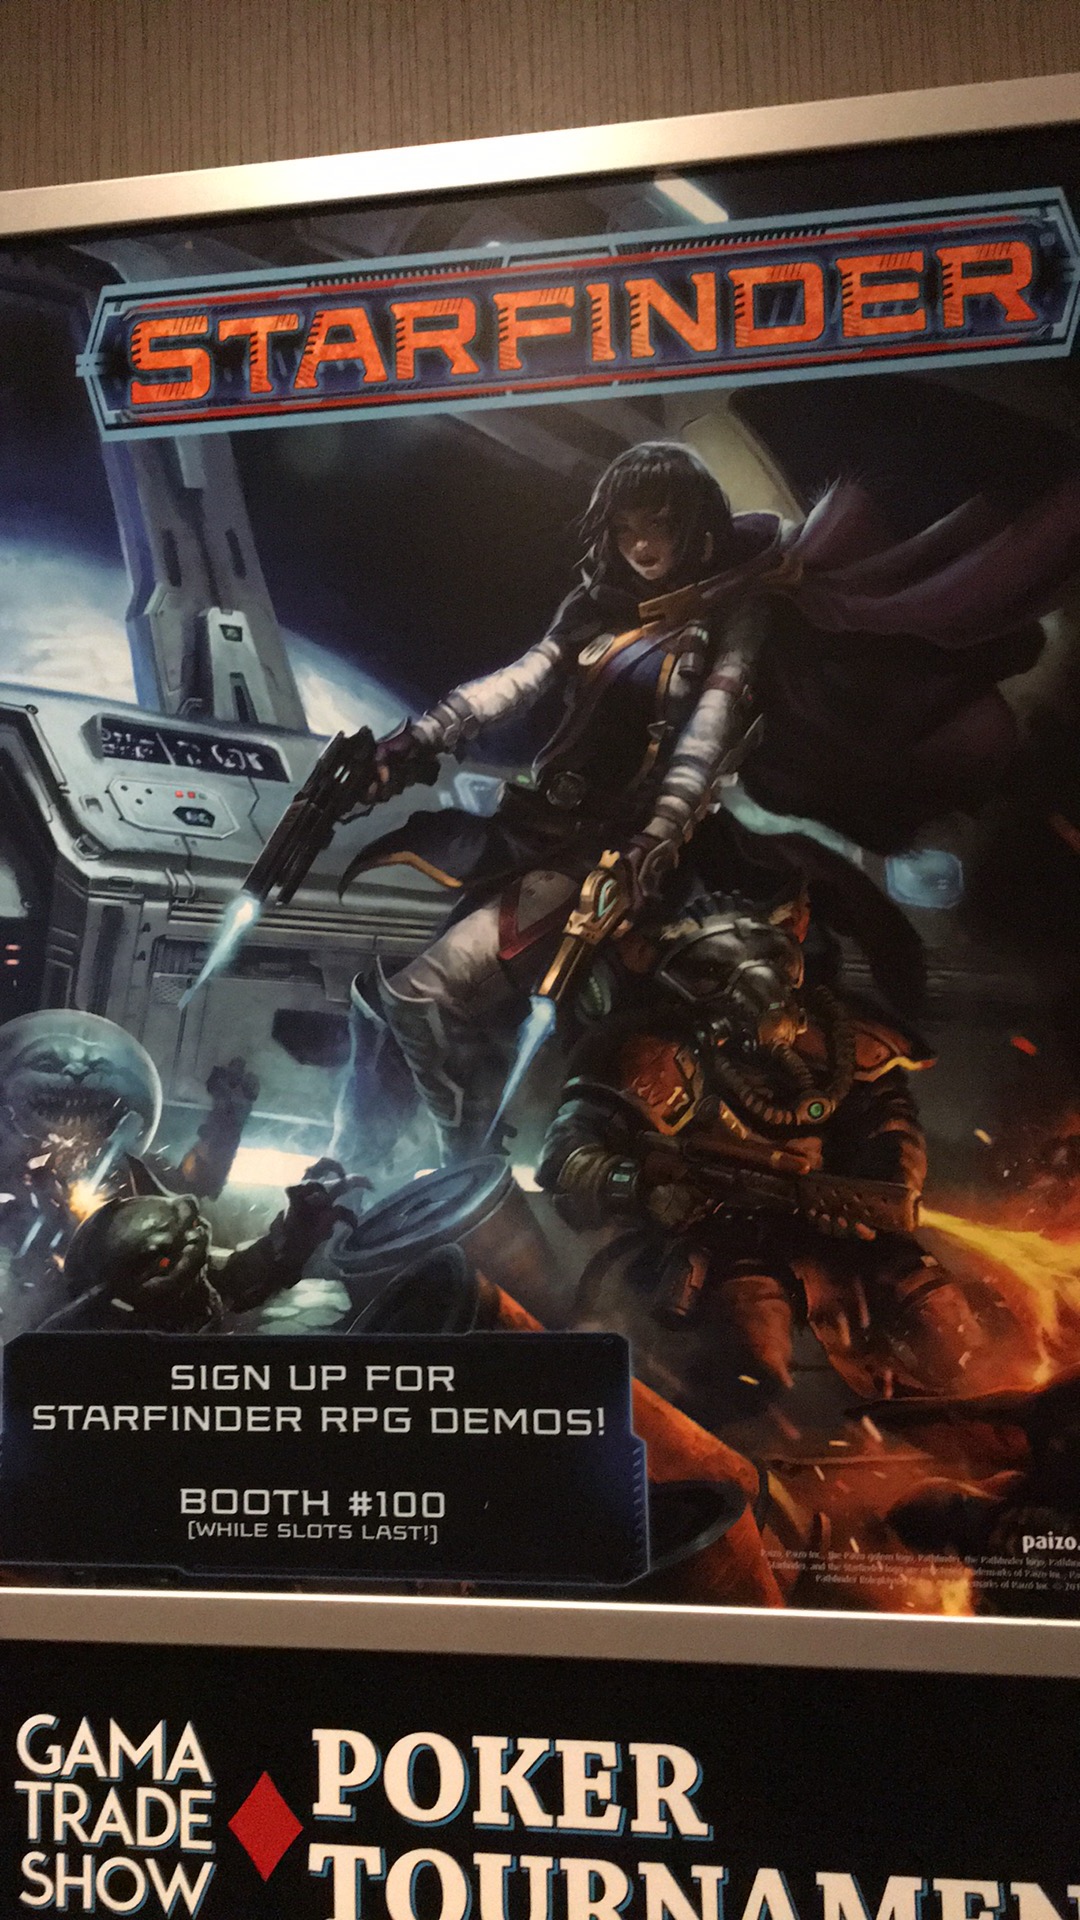 A Starfinder poster on display at GAMA